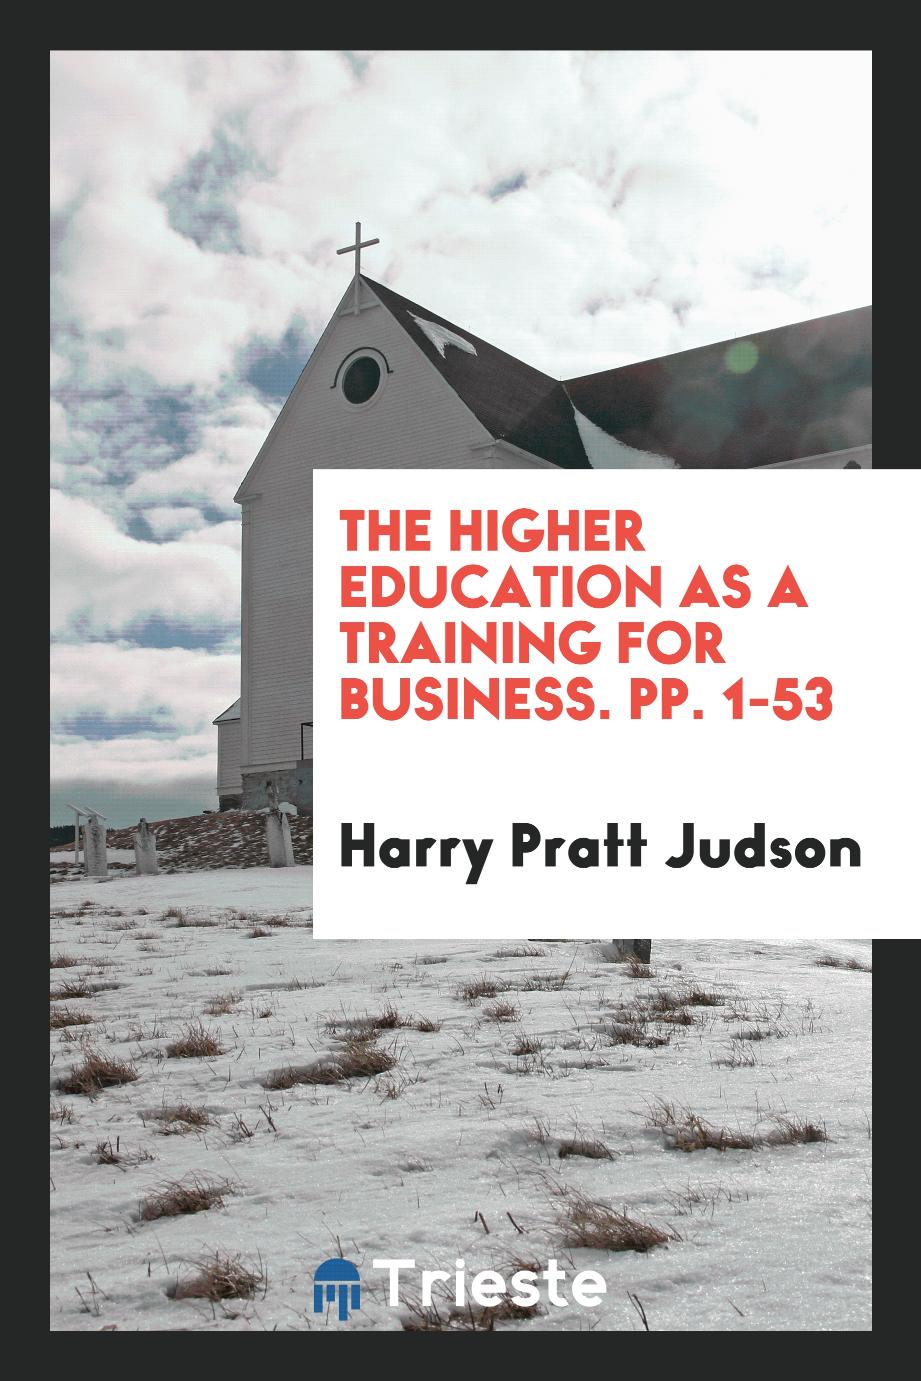 The Higher Education as a Training for Business. pp. 1-53